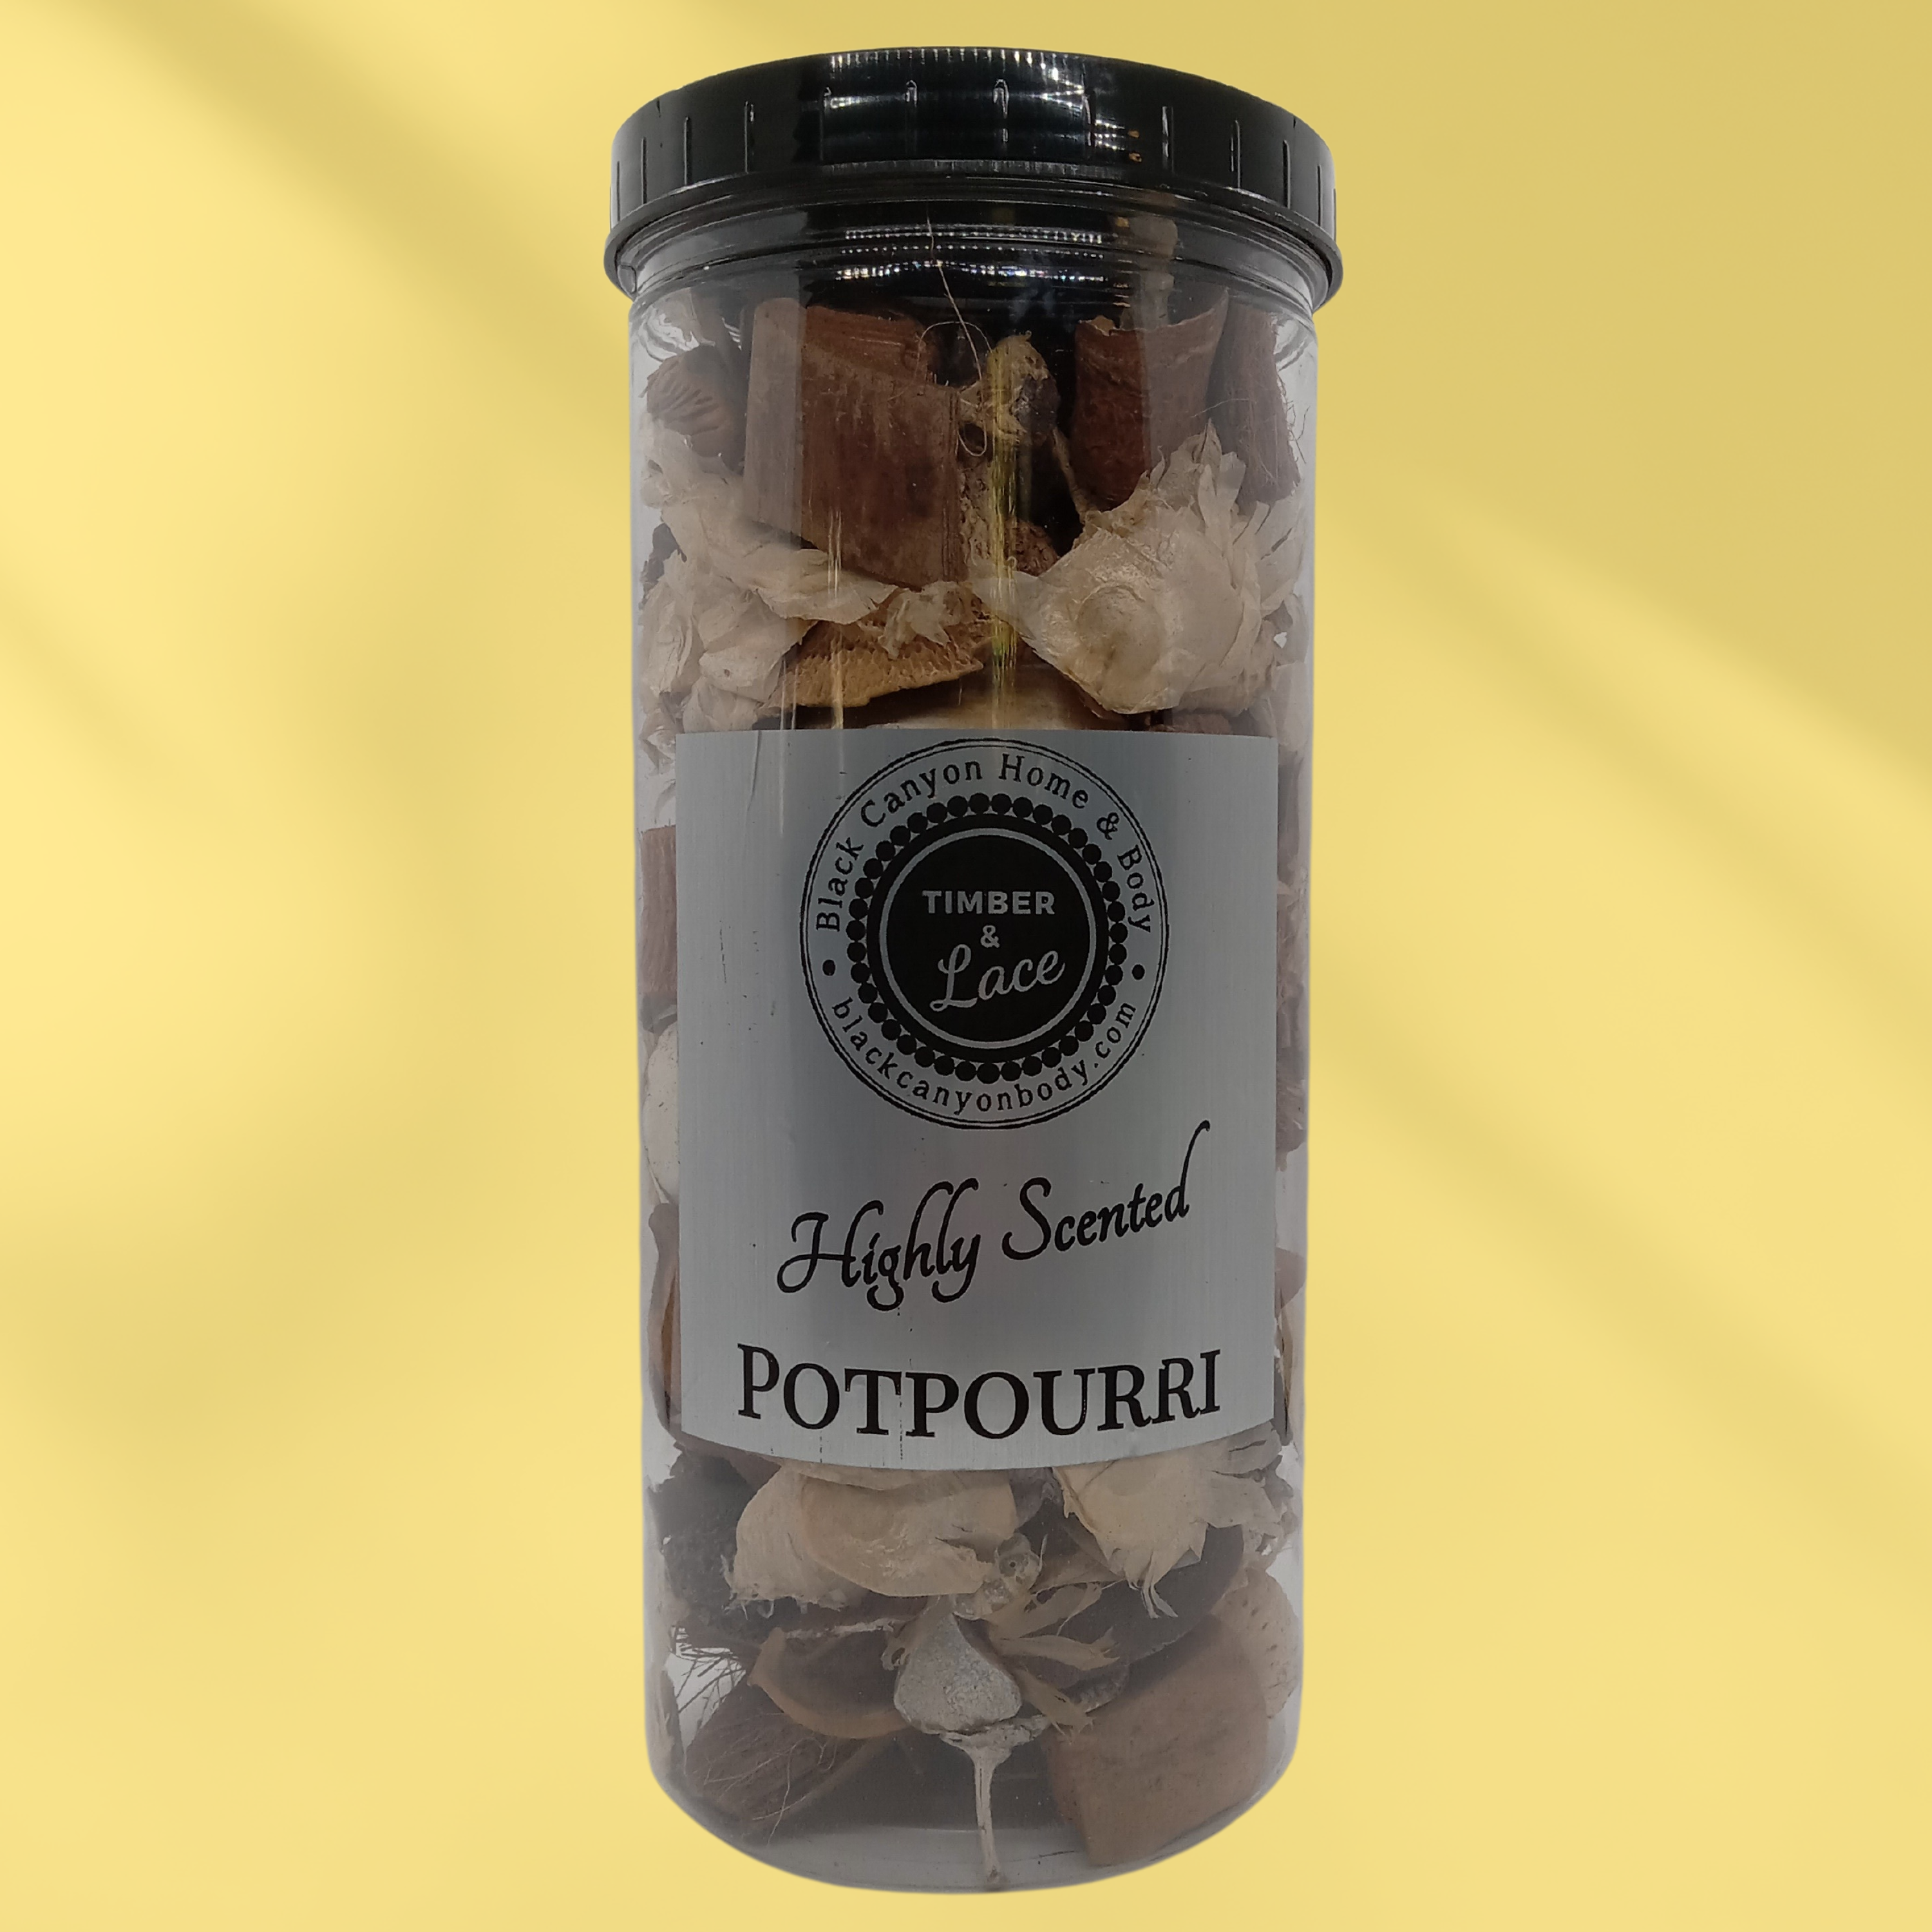 Timber & Lace Apothecary Vanilla Scented Potpourri